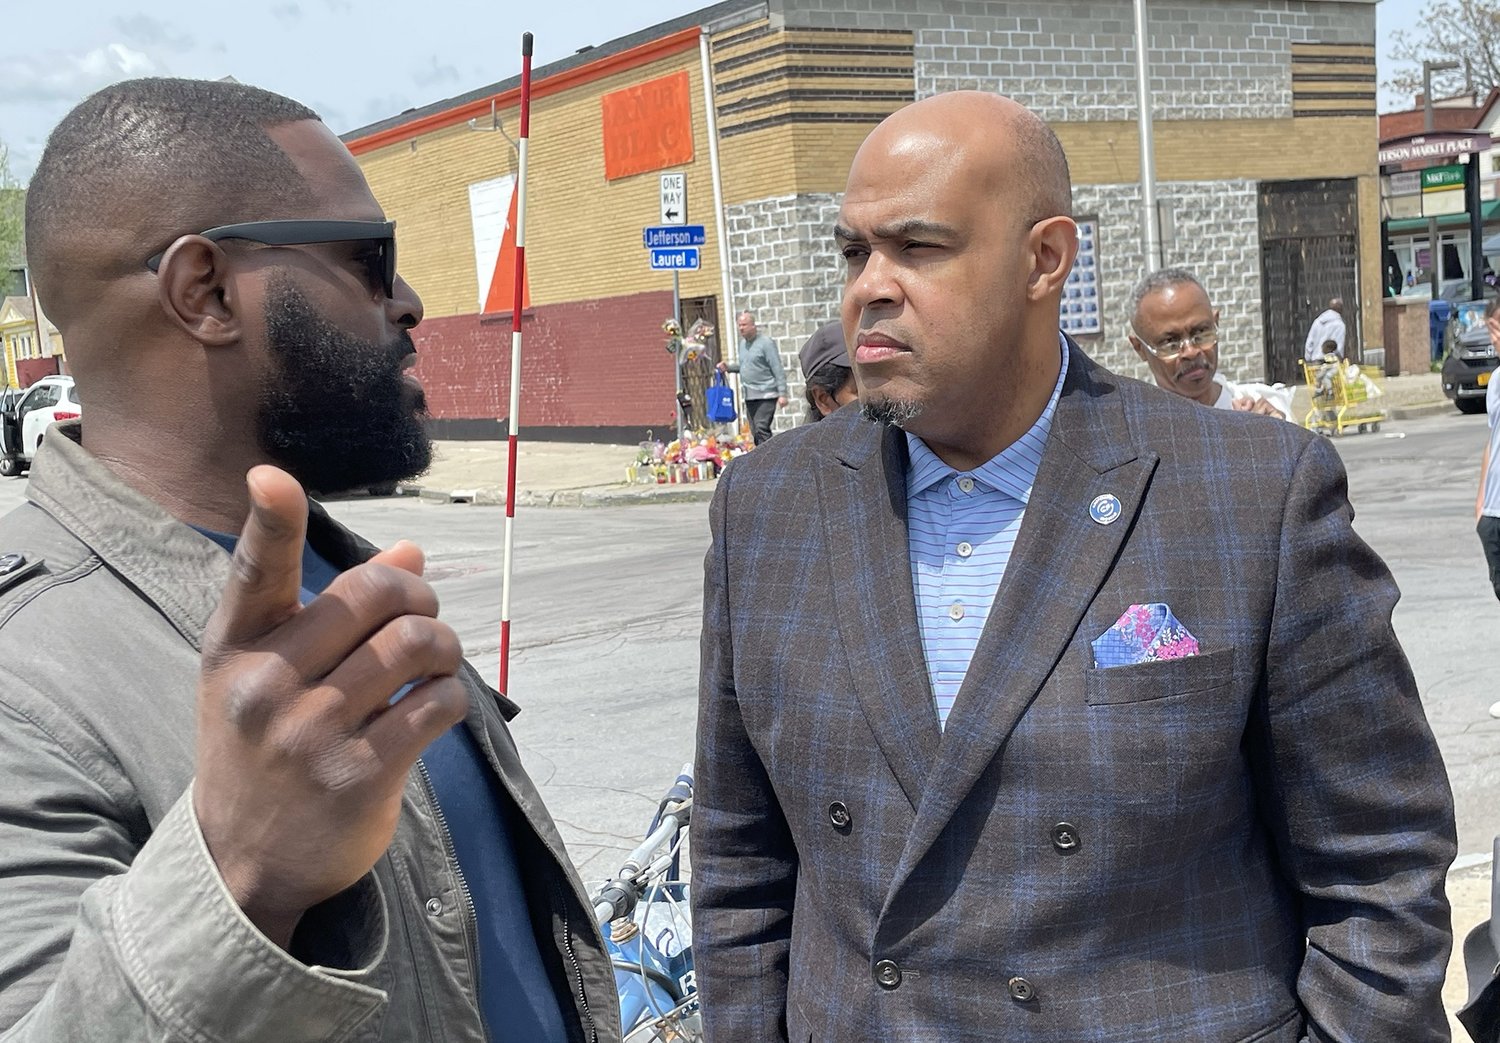 Willie McLaurin, right, speaks with Mark Hamilton, senior pastor of Faithful Stones Church, a non-Southern Baptist evangelical church, near the scene of the mass shooting at a Buffalo, N.Y., supermarket.